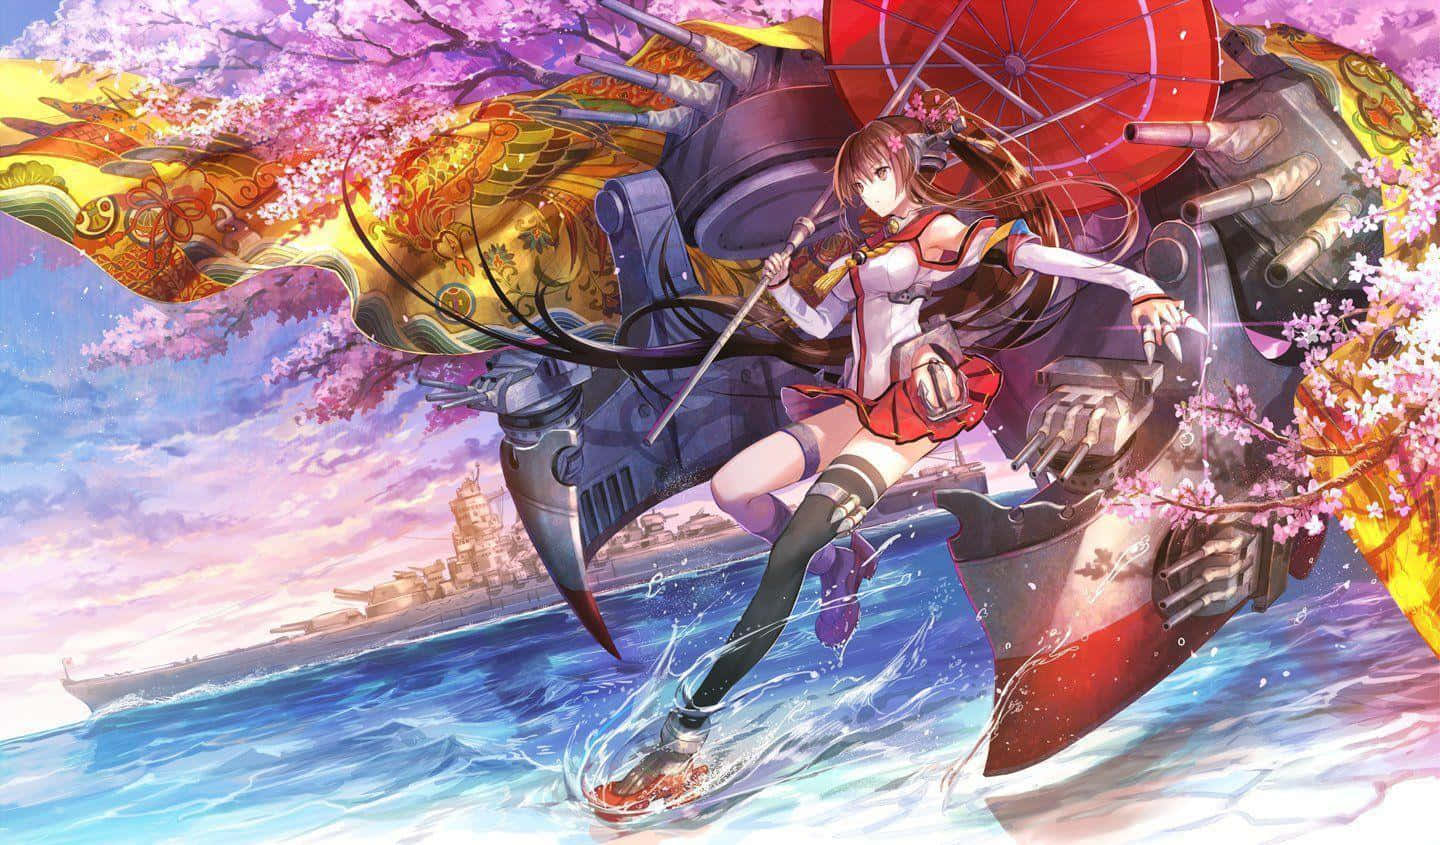 The anime series "Kantai Collection" follows a group of girls with naval ship power. Wallpaper